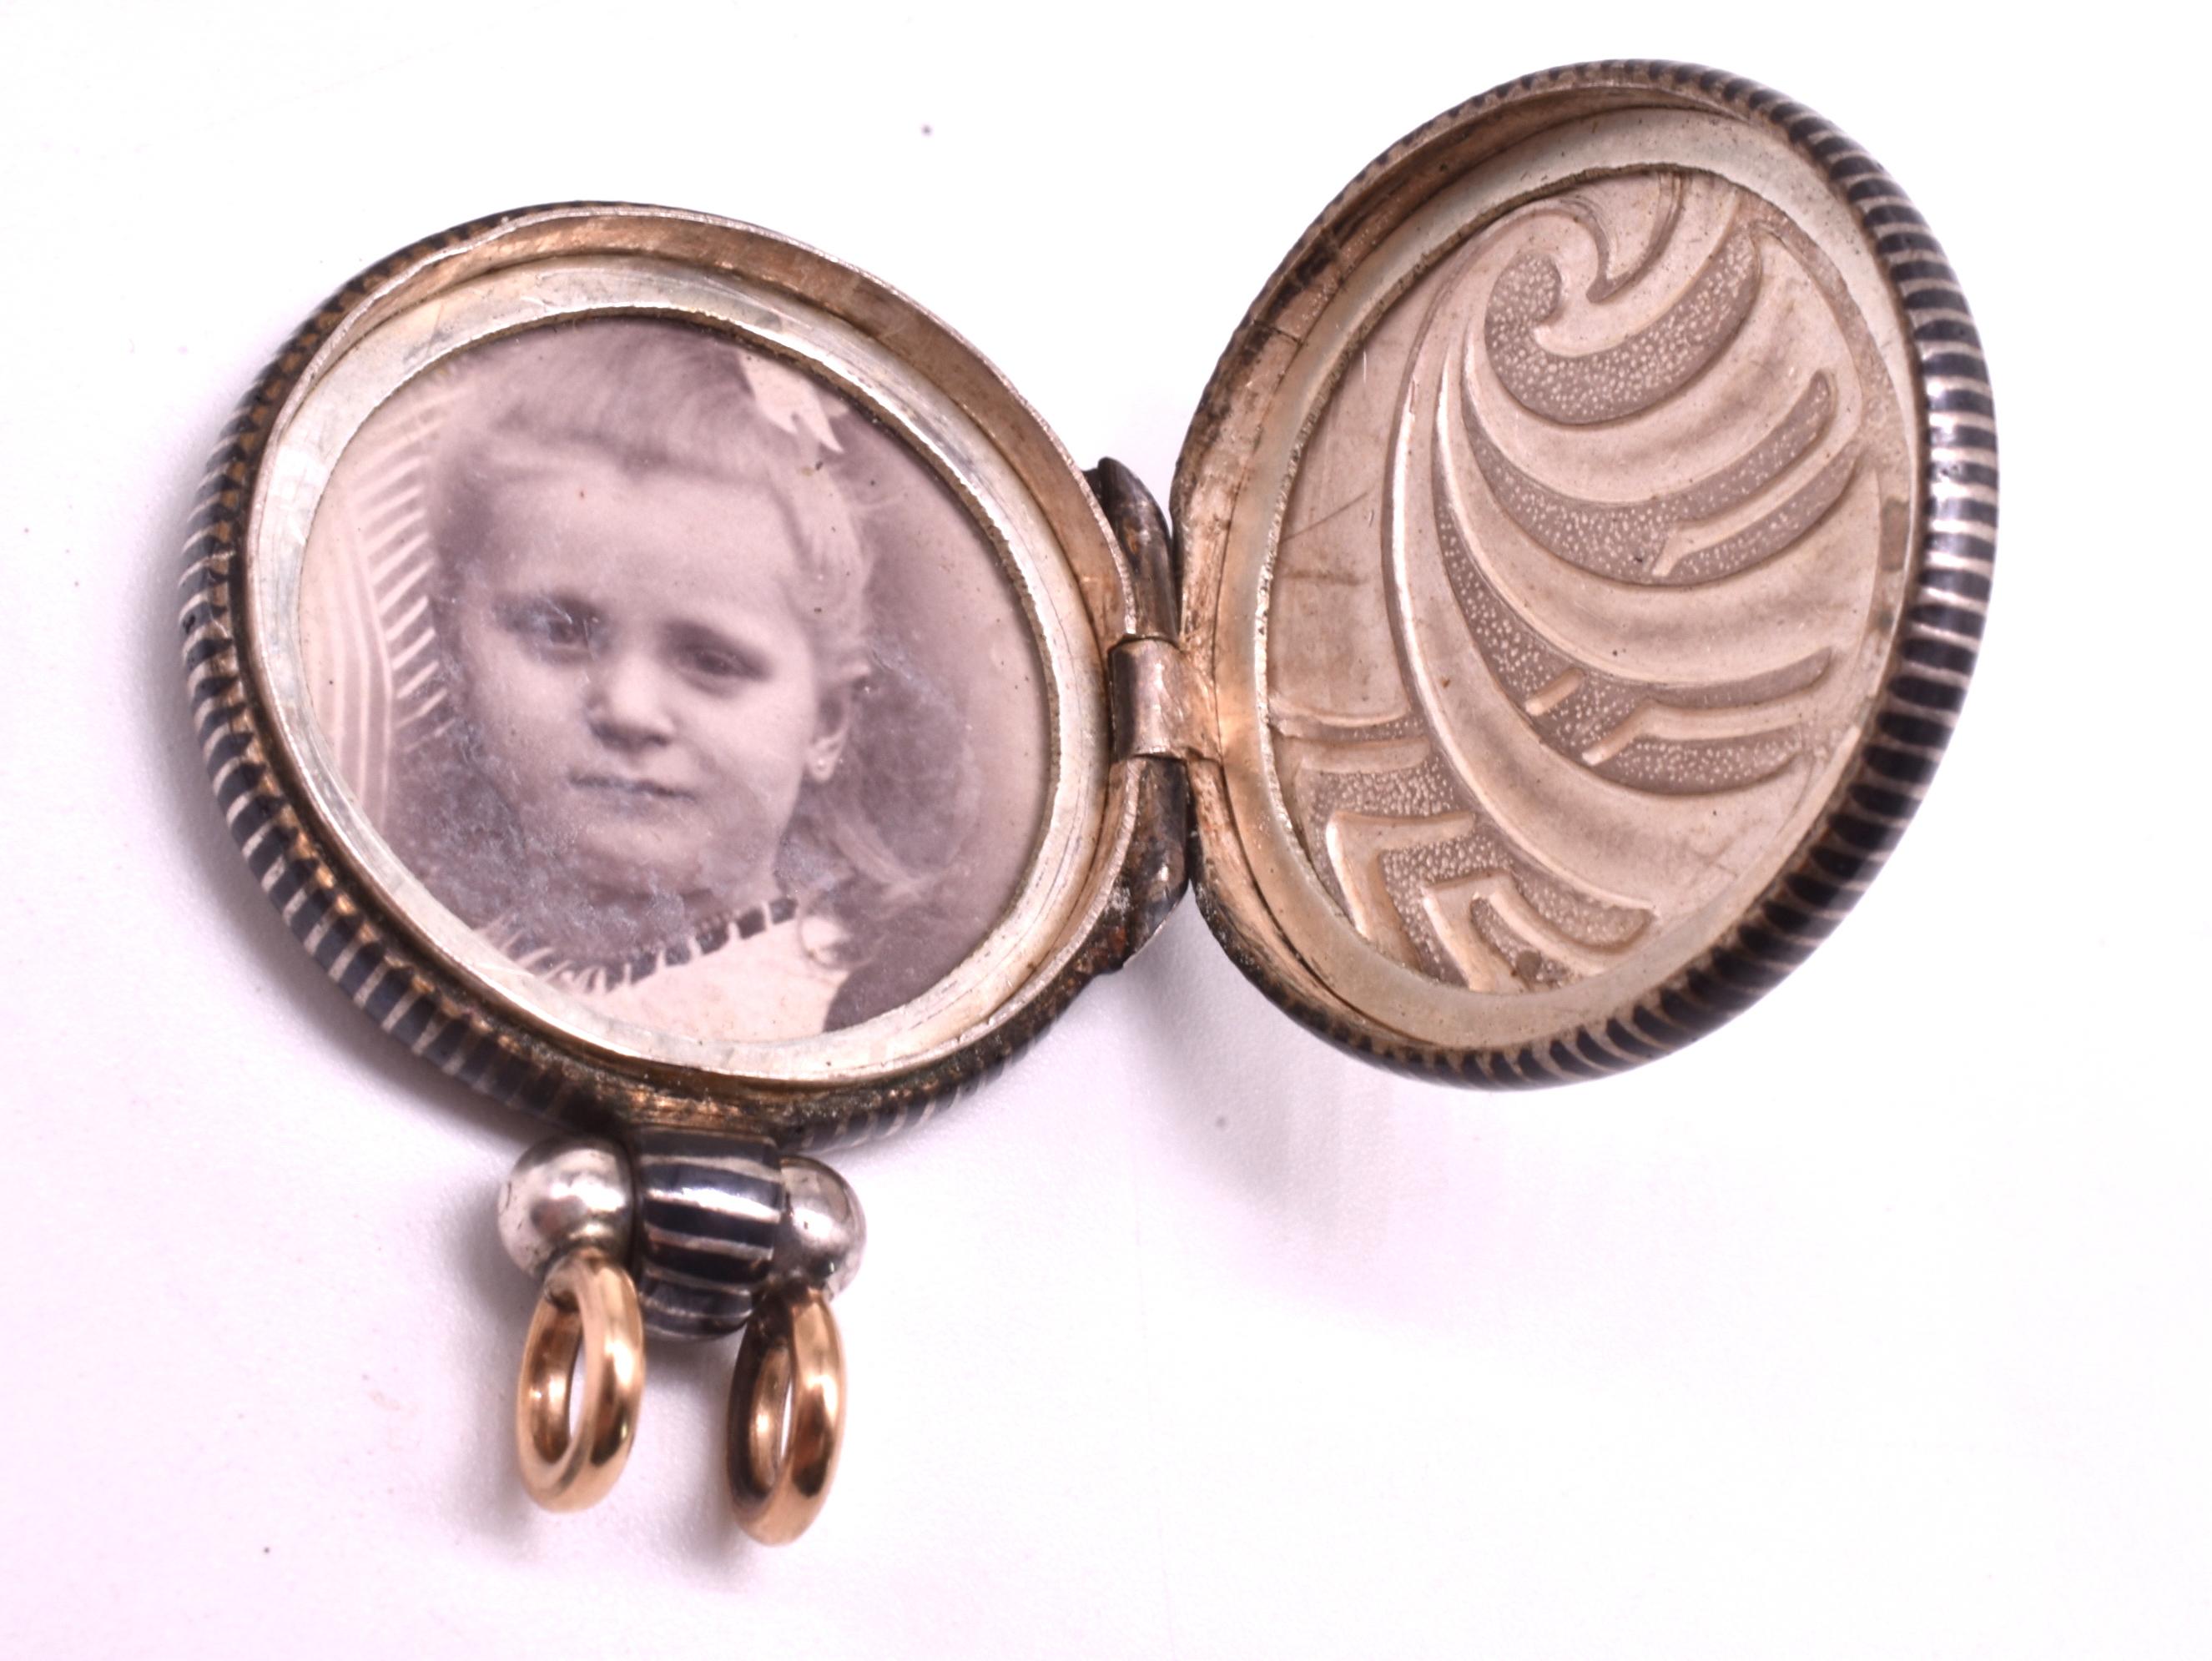 A lovely Victorian Niello locket with a pleasing graphic design on its face and back in black enamel and silver. This most unusual locket would look wonderful hanging from your silver chain. The locket has a bold Wiener Workstatte style (English: